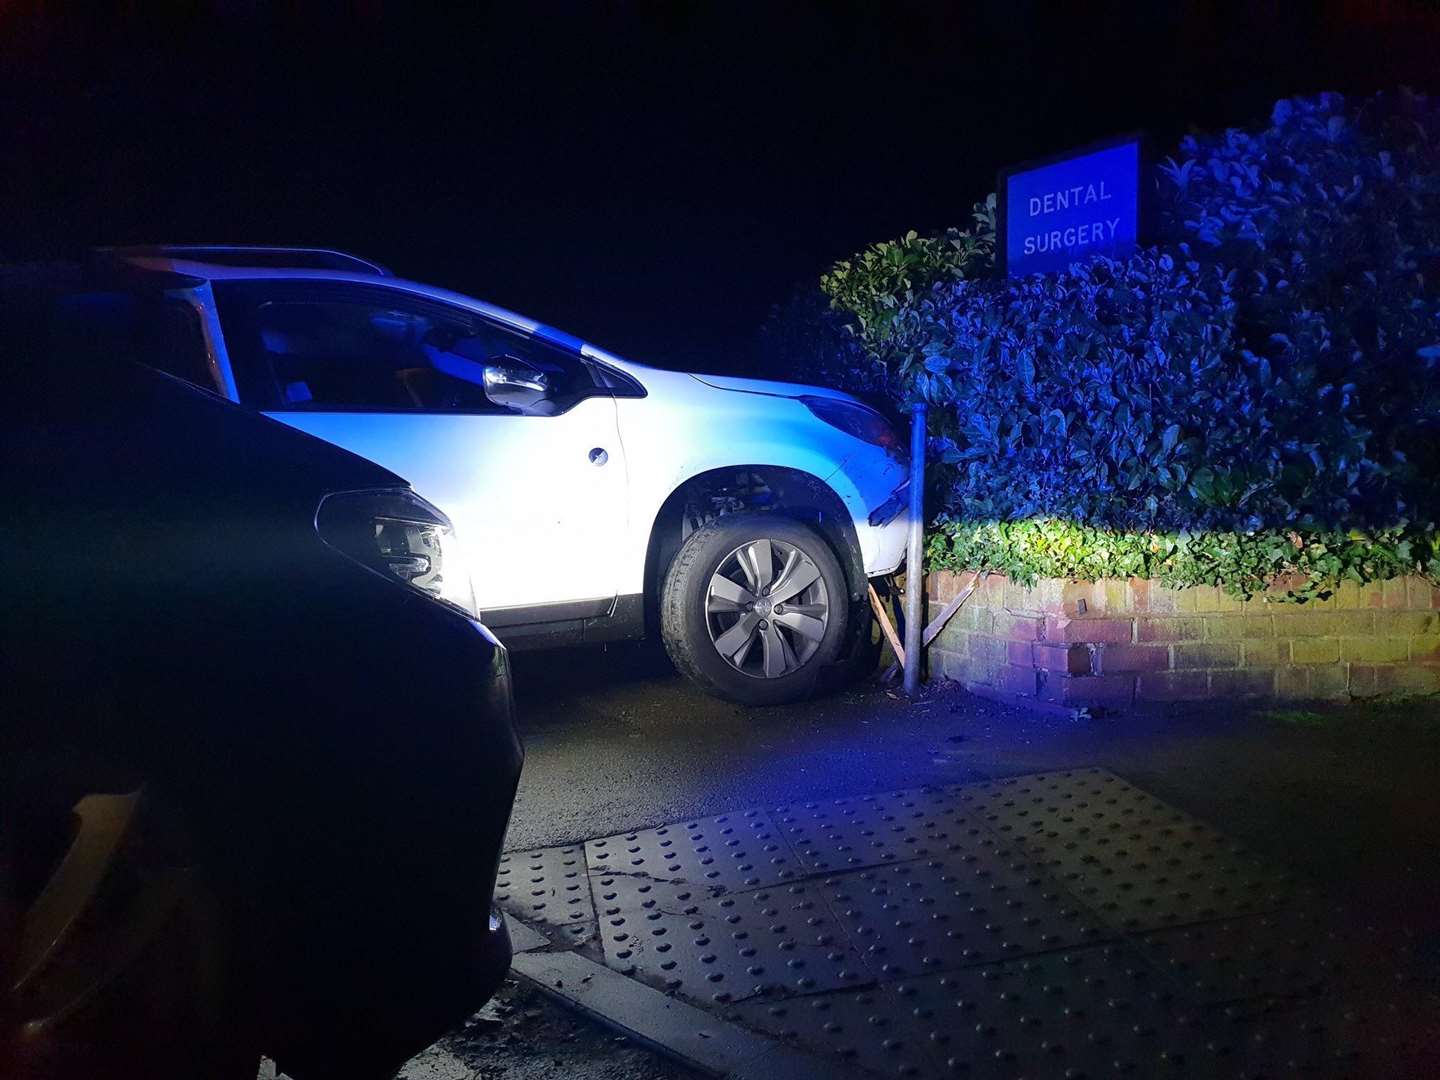 Kent police made an arrest after a suspected drink driver crashed into a dental surgery in Maidstone. Pic: Kent Police RPU (6023465)